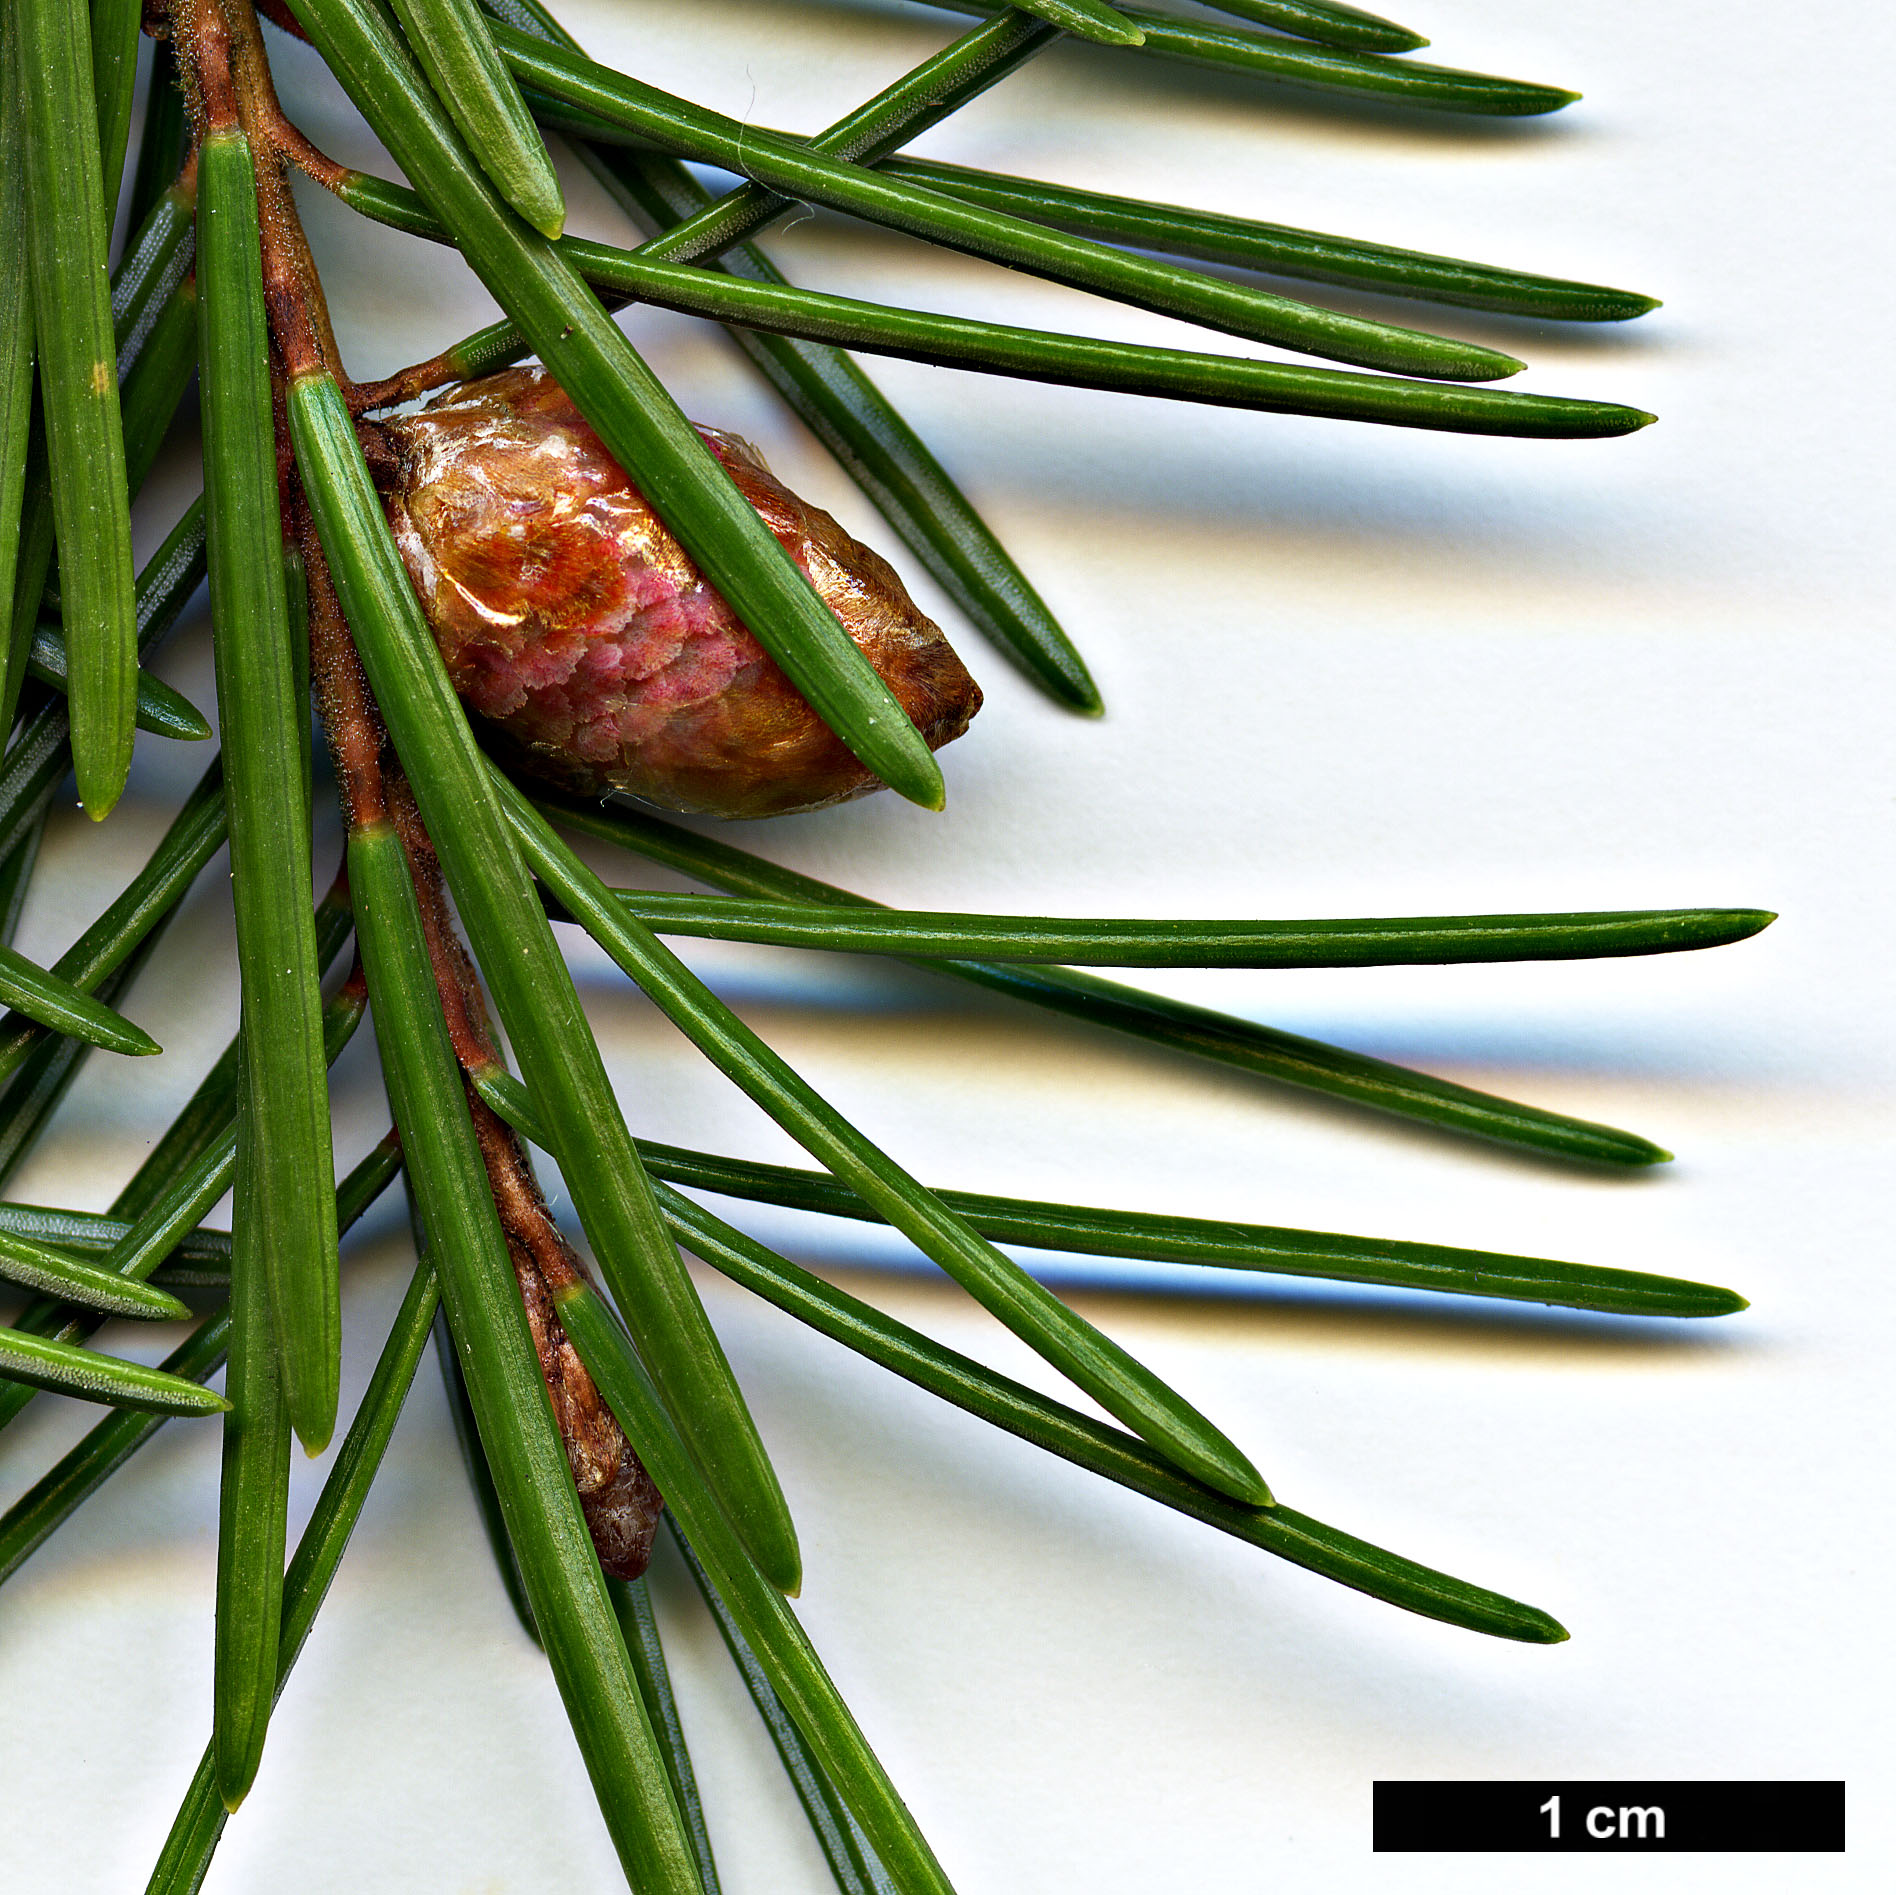 High resolution image: Family: Pinaceae - Genus: Picea - Taxon: breweriana